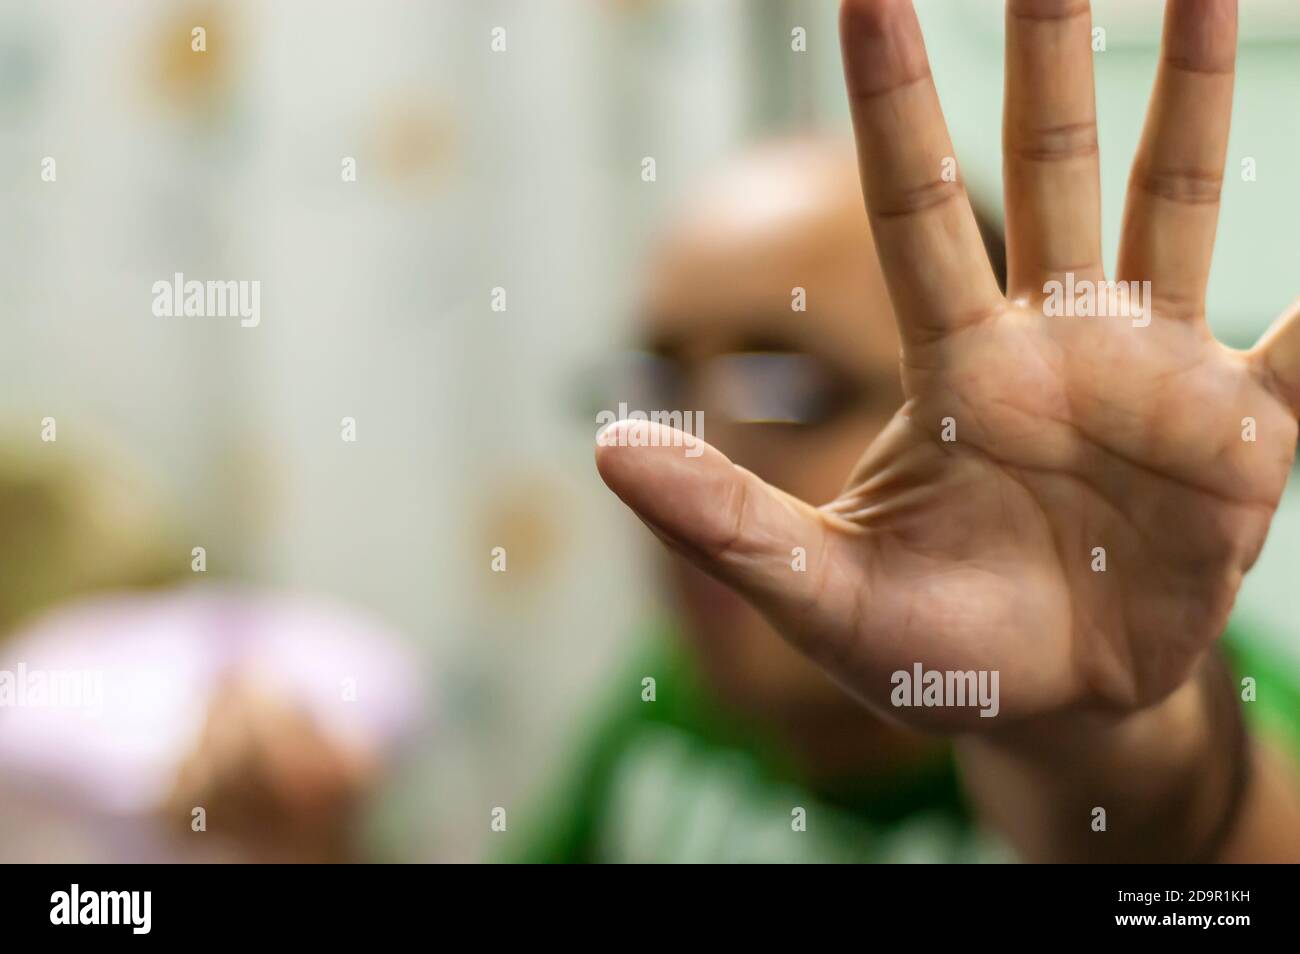 A man's hand with the palm open and facing the camera signaling stop, no, wait. Concept for denial, rejection, etc. Stock Photo